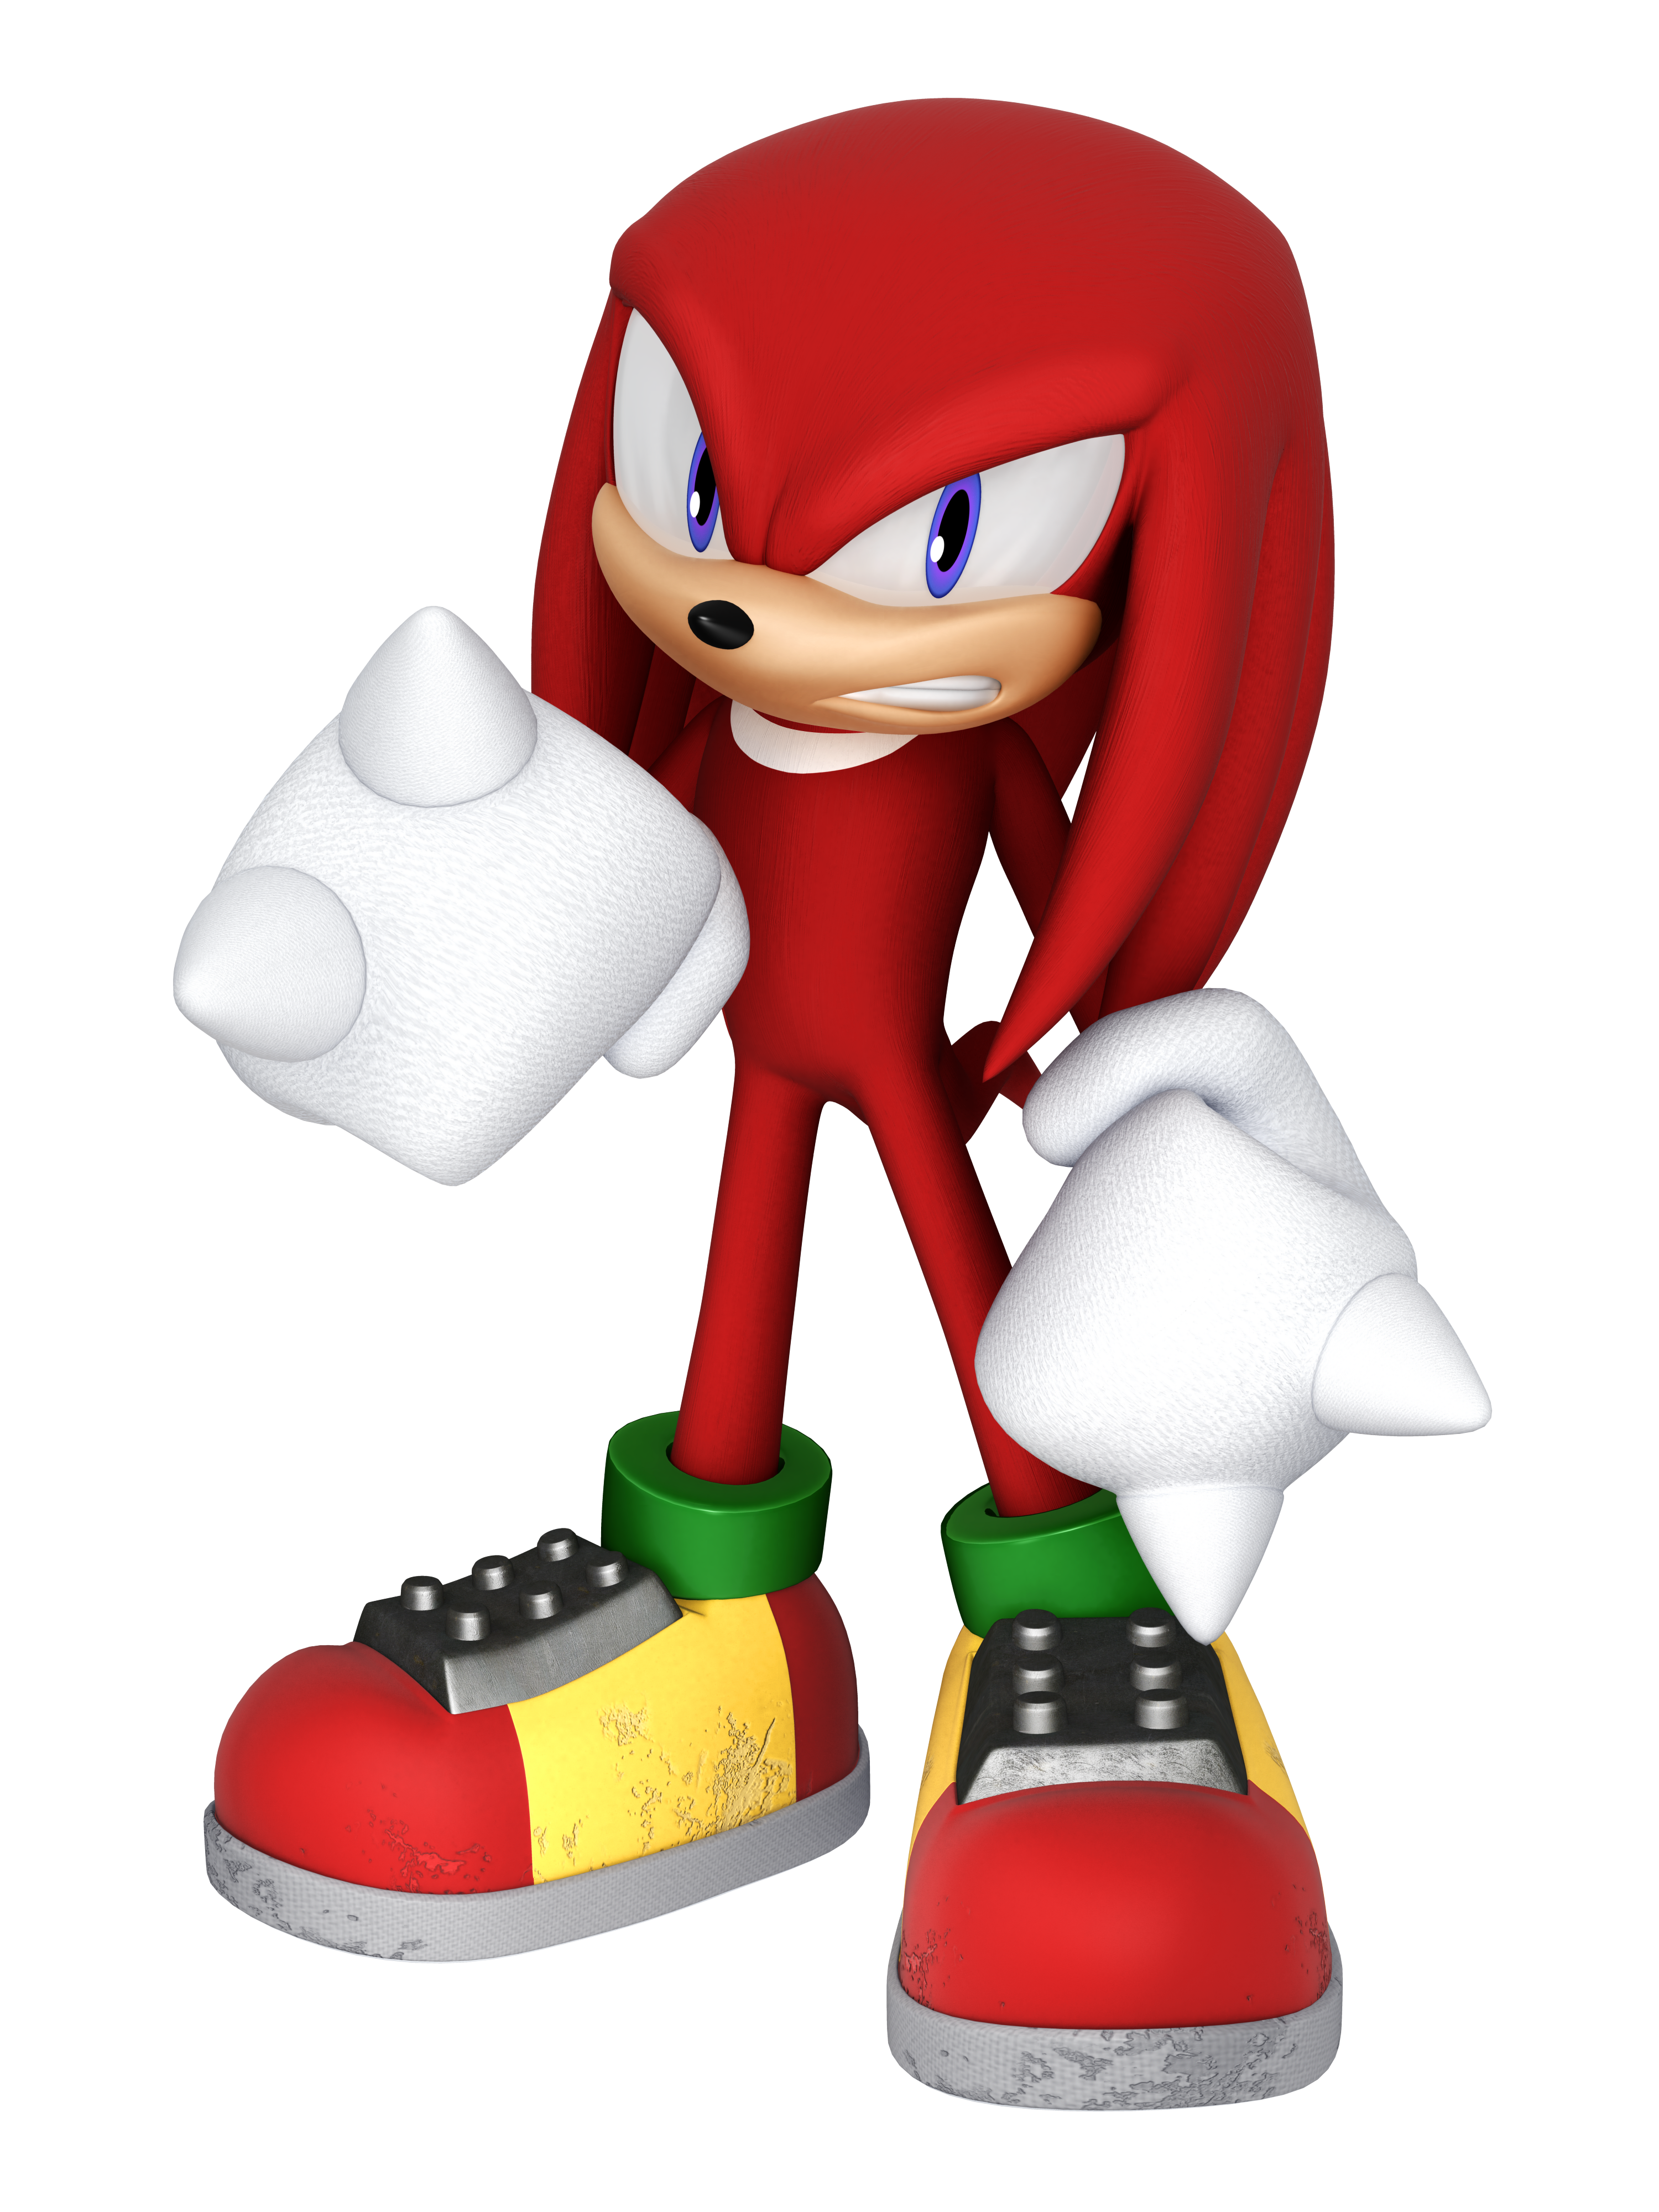 knuckles the echidna as a girl